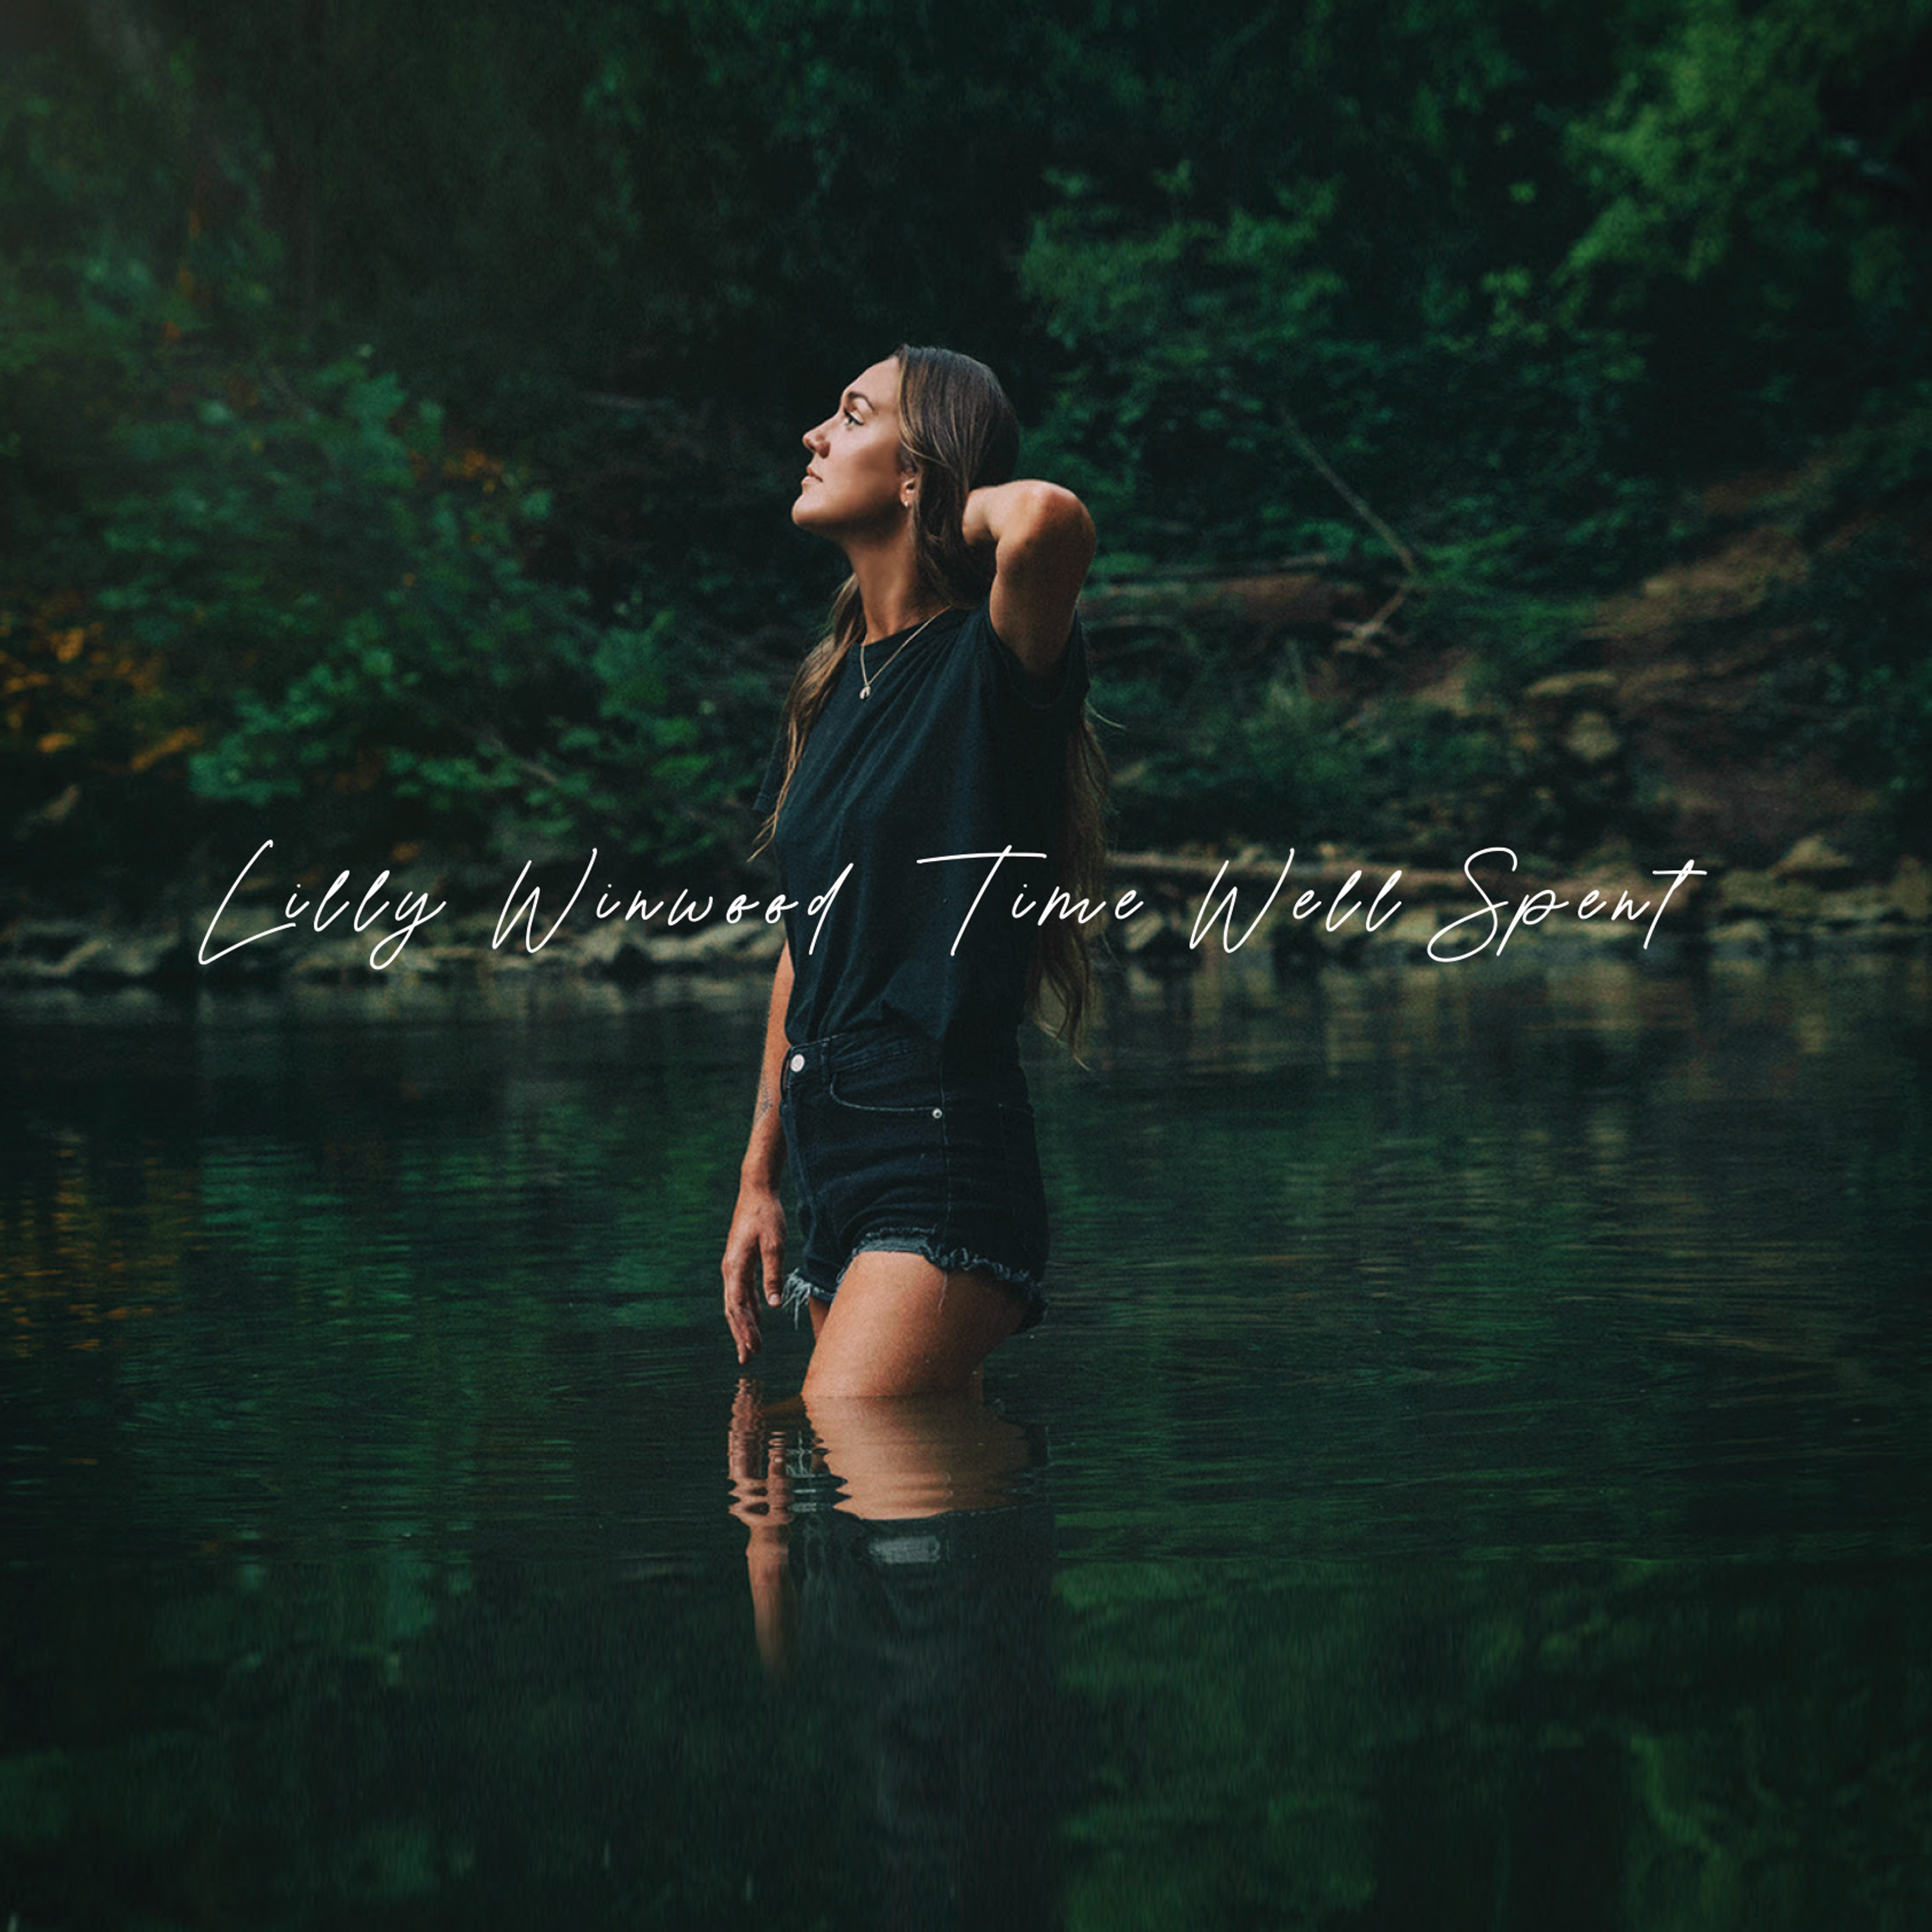 Lilly Winwood Gears Up To Release Debut Album Time Well Spent January 29